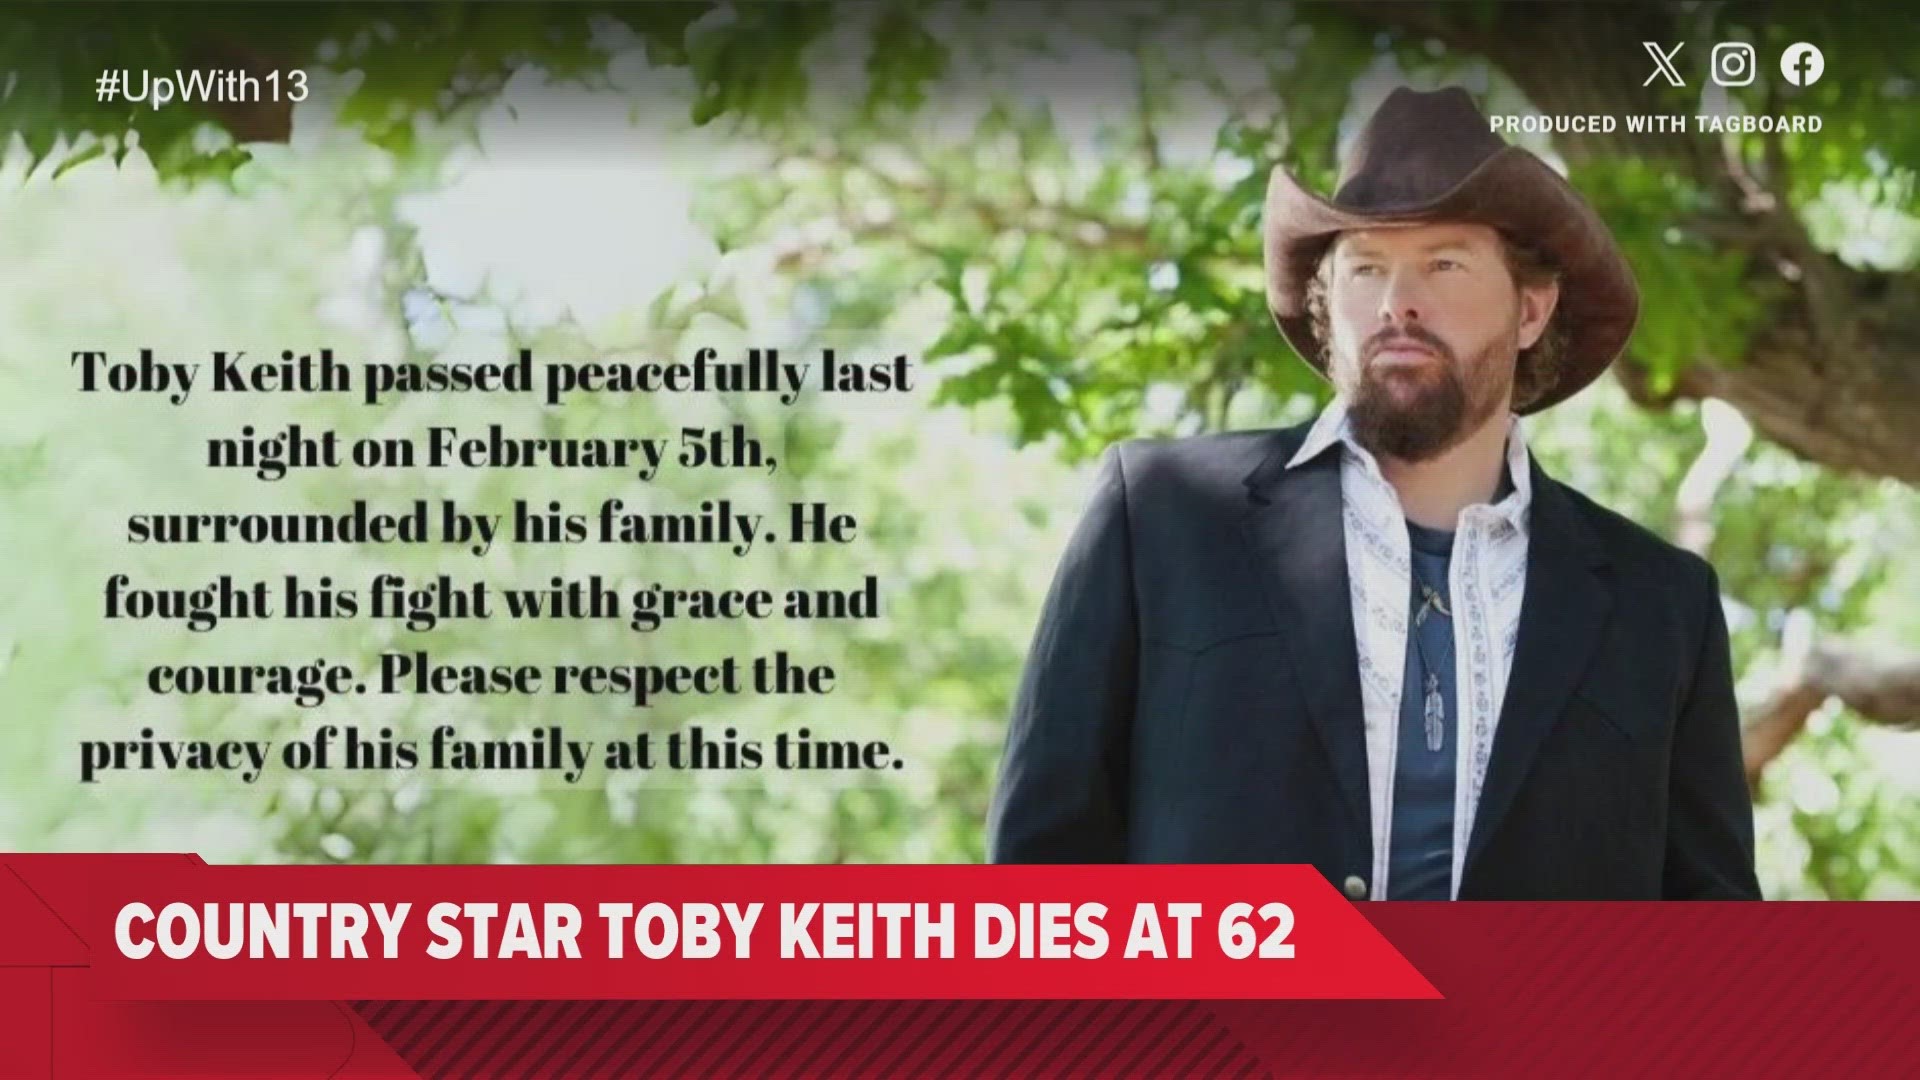 Toby Keith has died after battling stomach cancer